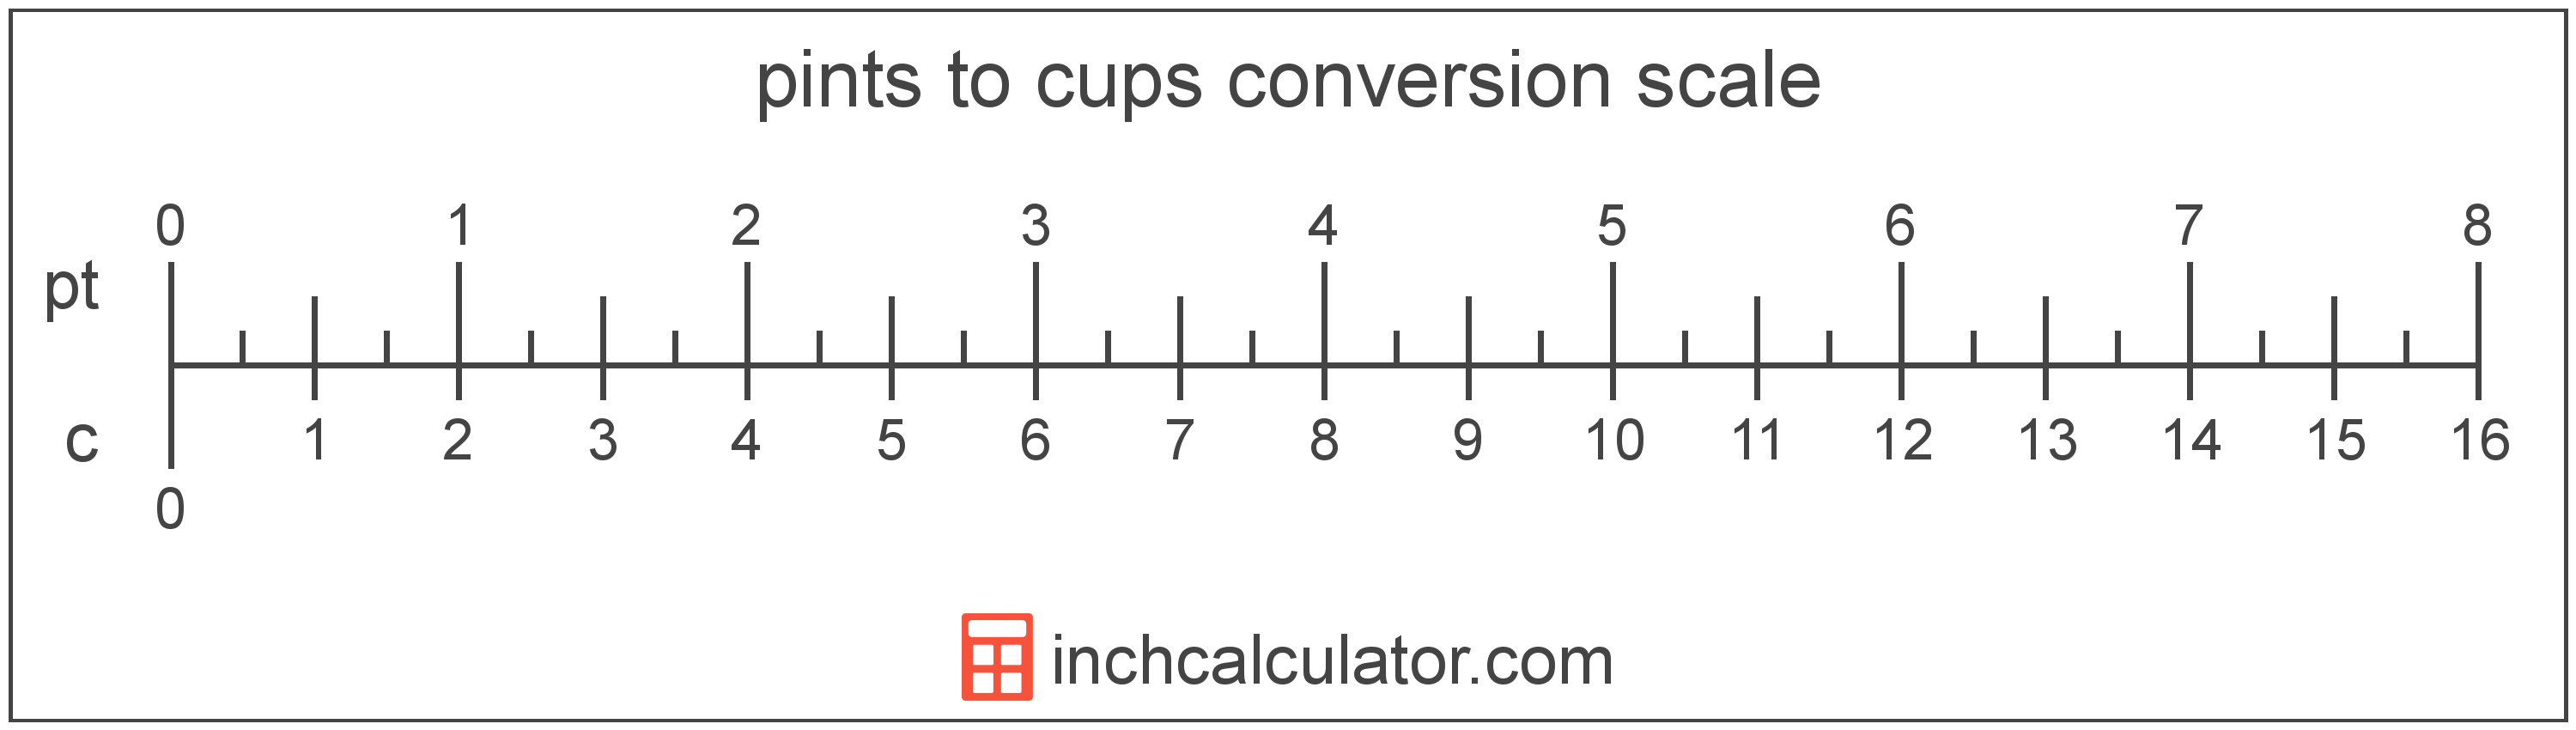 Pints to Cups Conversion (pt to c) - Inch Calculator